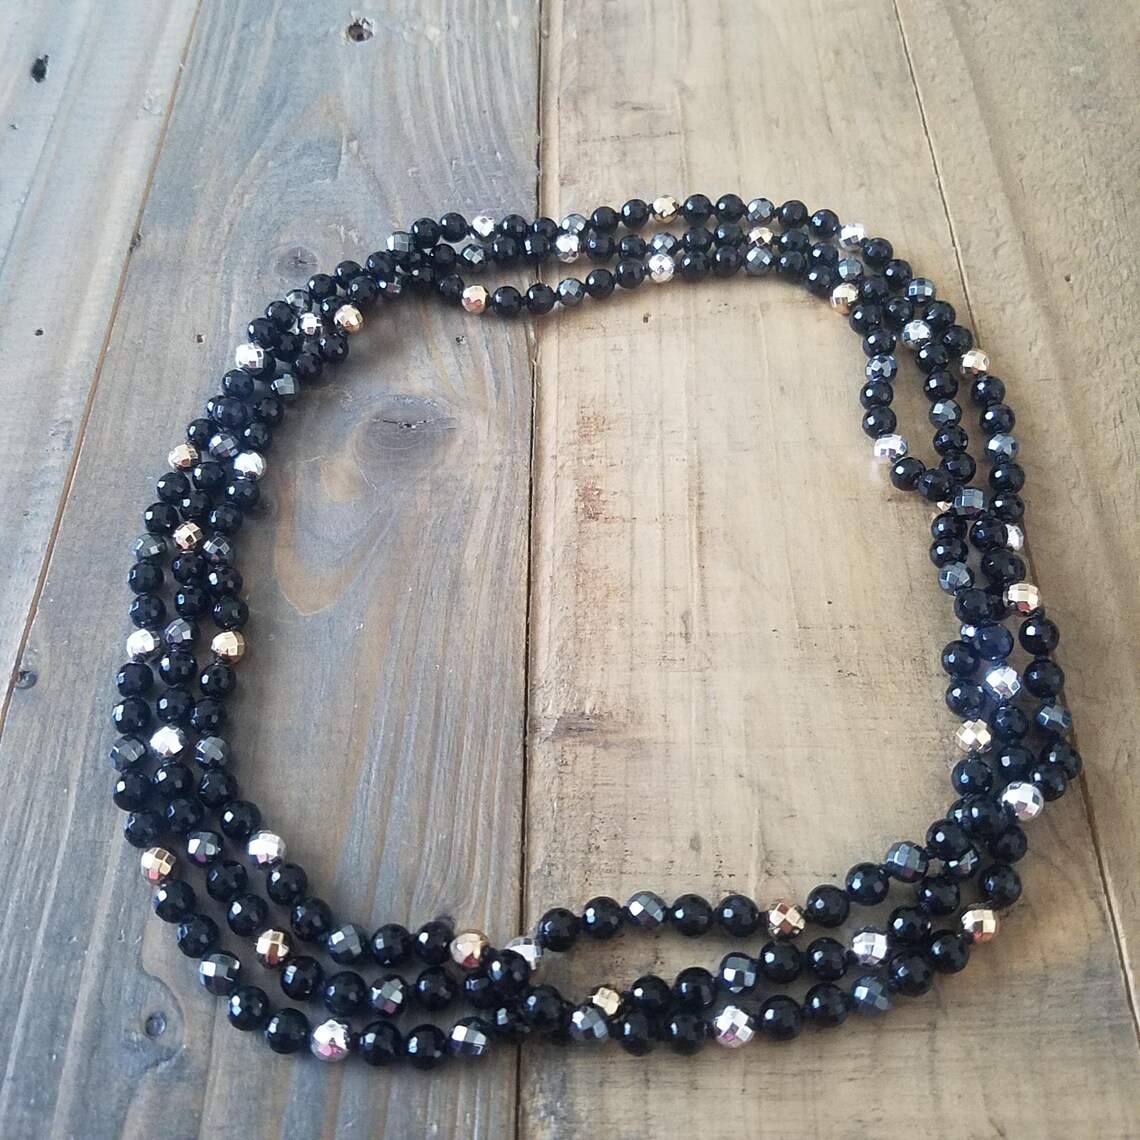 Black Onyx Beaded Wrap Necklace Long Bead Necklace 60 inch | Etsy